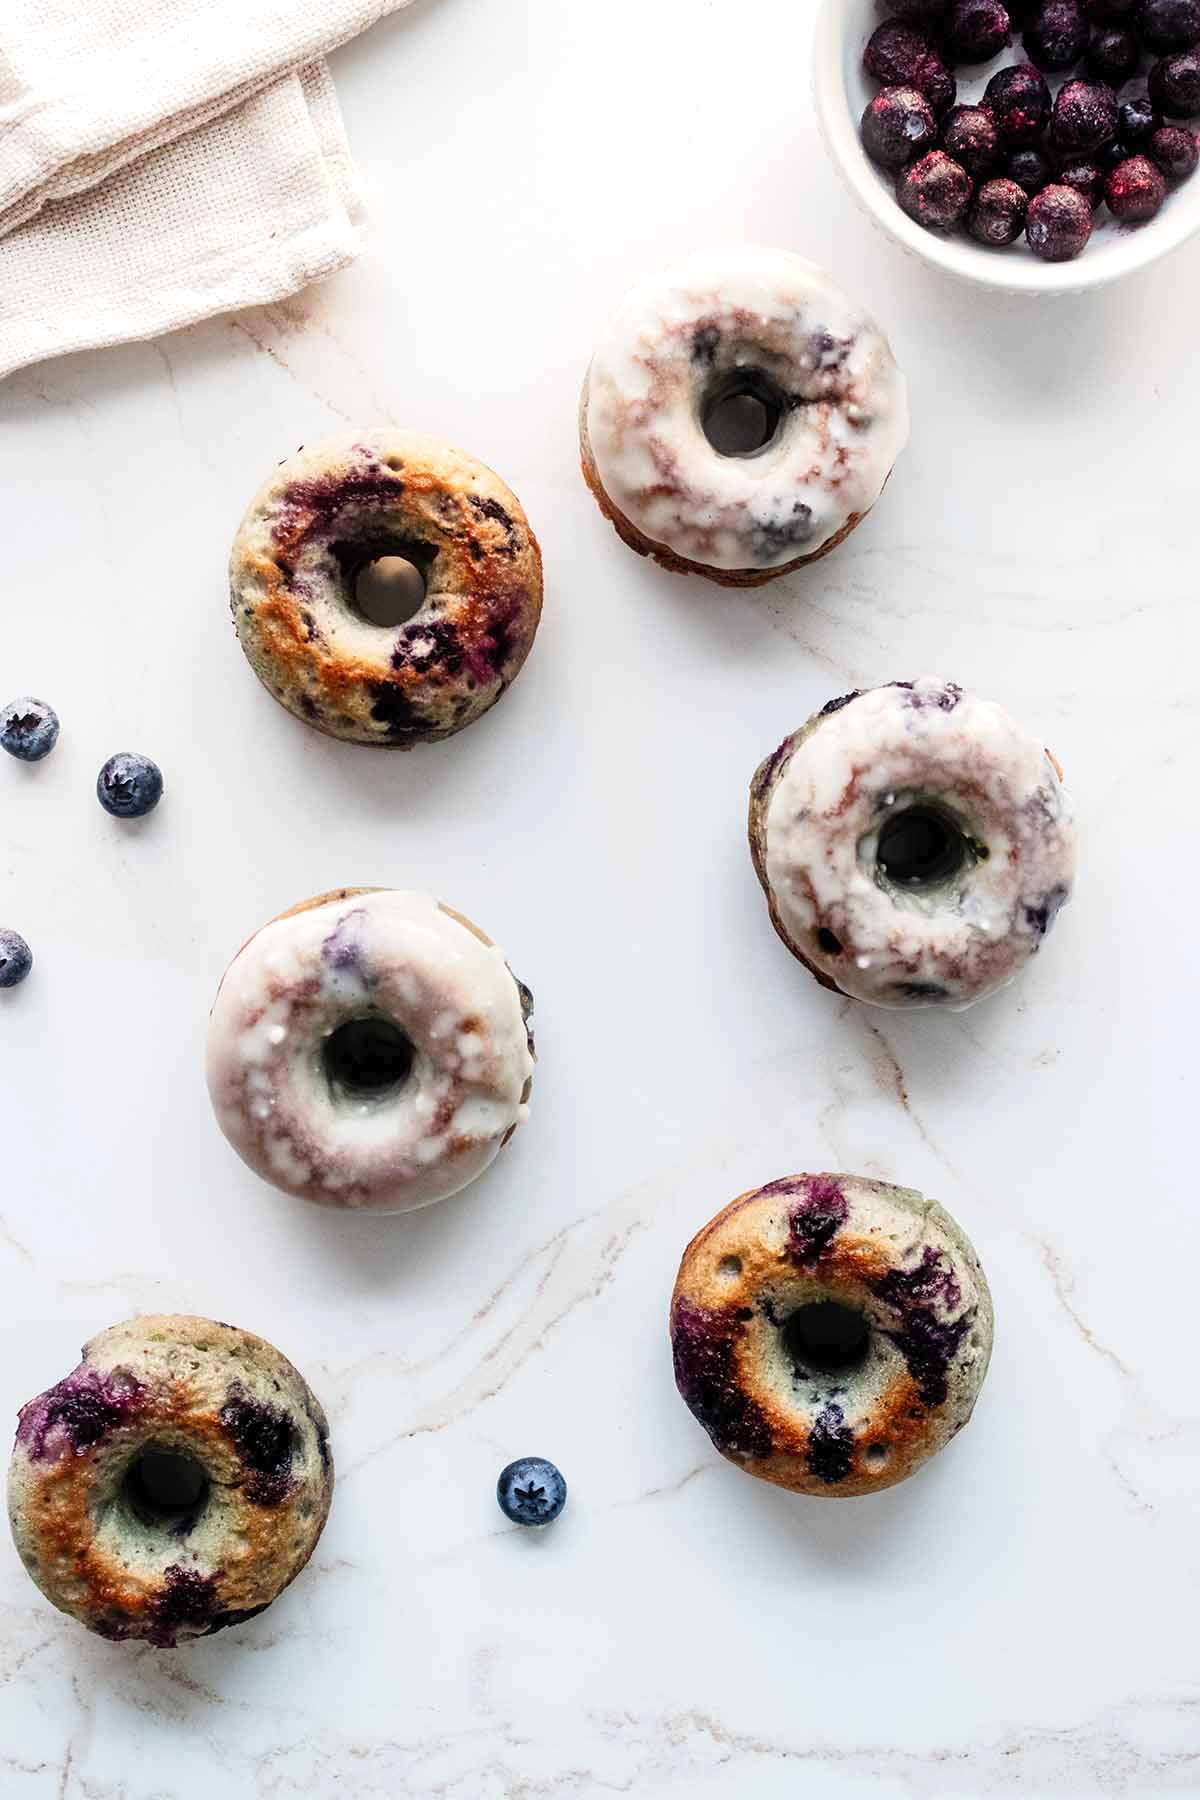 Overhead view of blueberry donuts on a marble surface with a bowl of blueberries and a white napkin